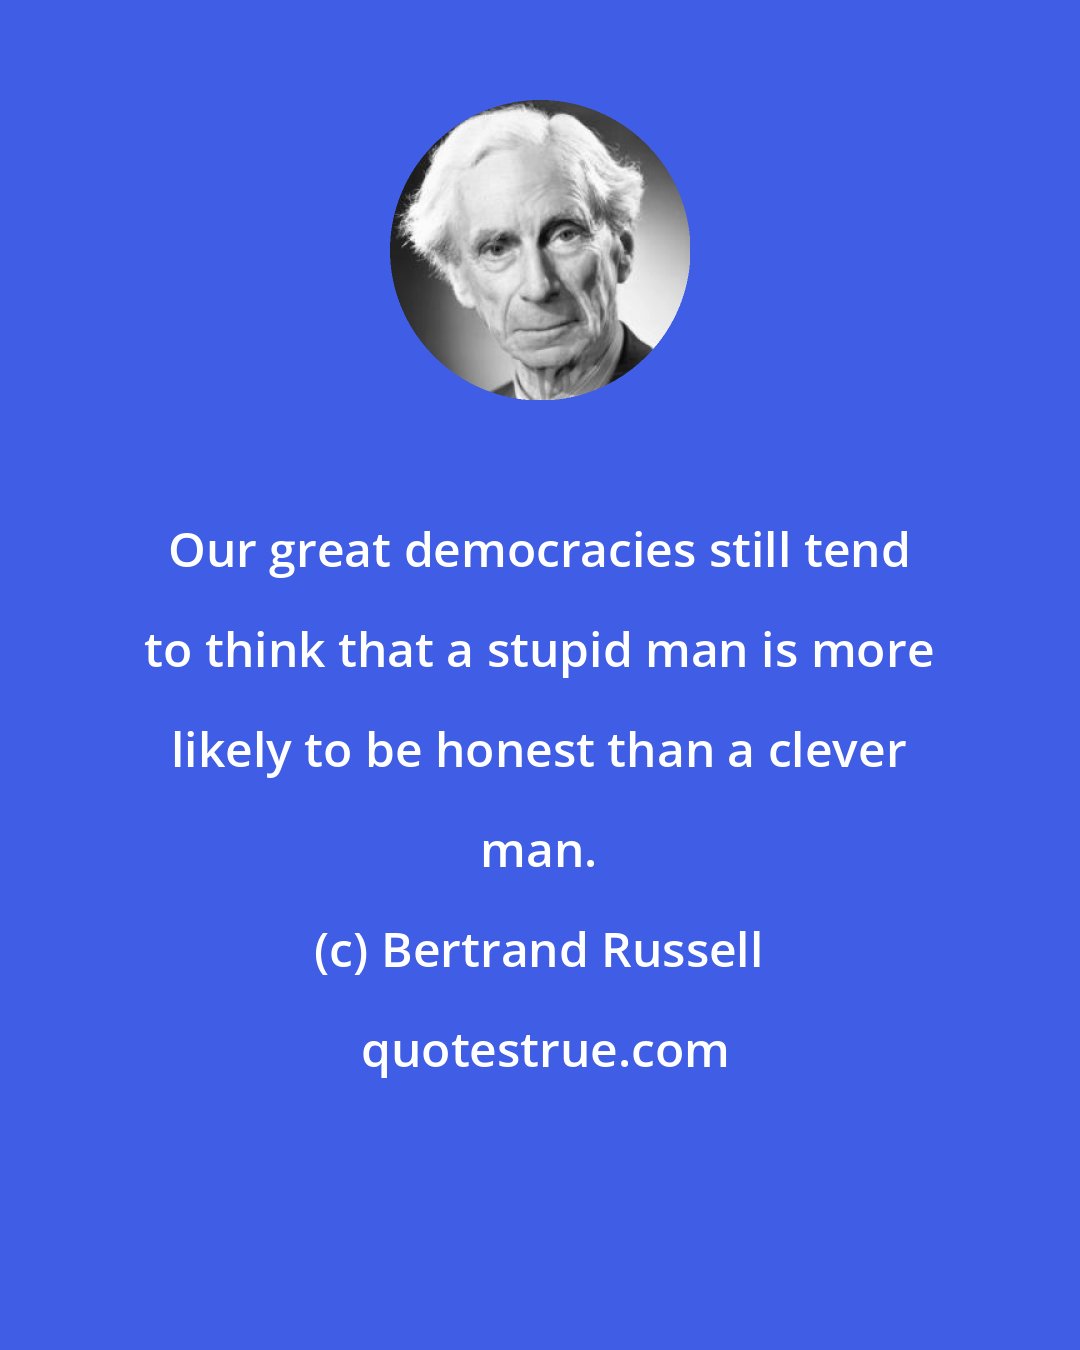 Bertrand Russell: Our great democracies still tend to think that a stupid man is more likely to be honest than a clever man.